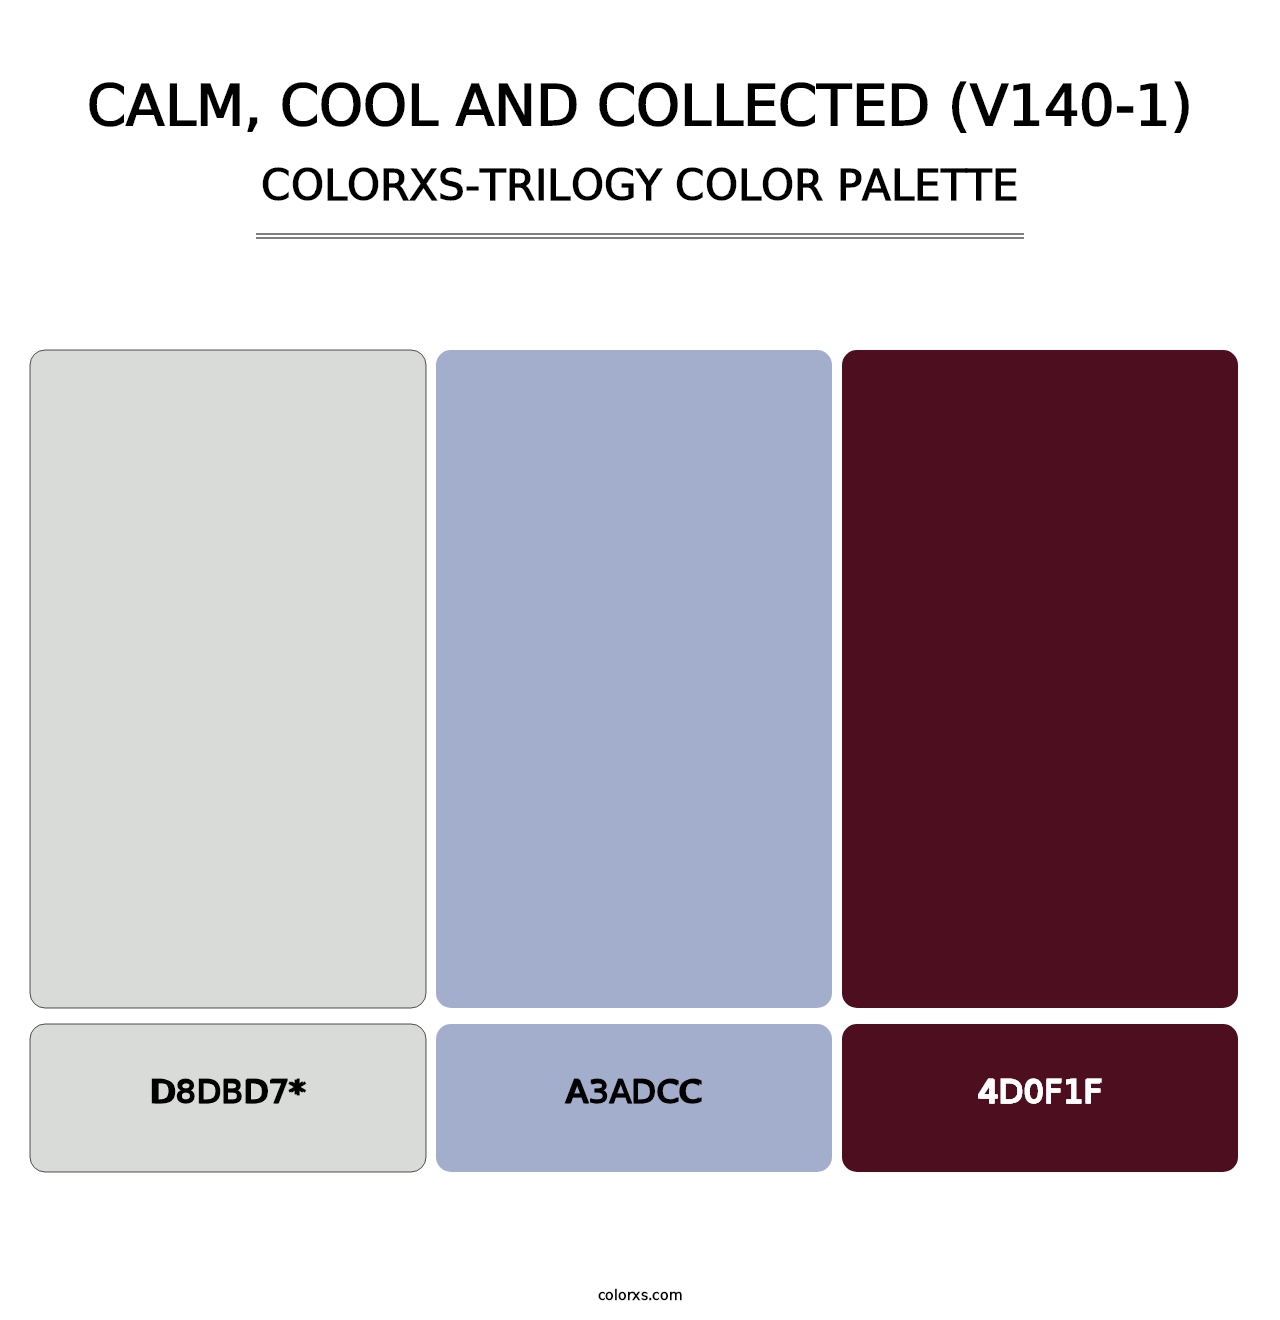 Calm, Cool and Collected (V140-1) - Colorxs Trilogy Palette